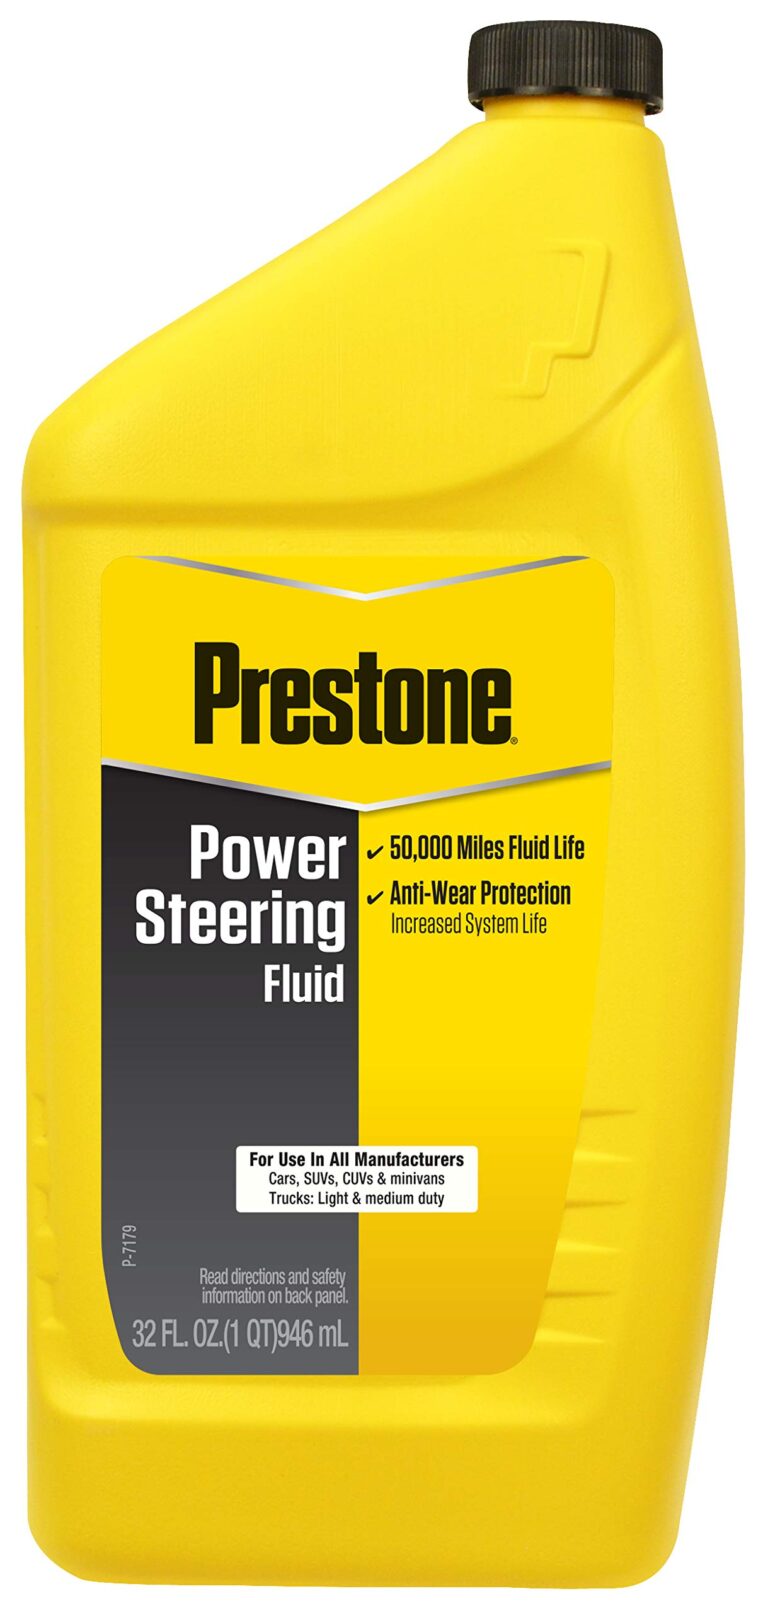 Can I Use Anit Freeze Fluid for Power Steering Fluid